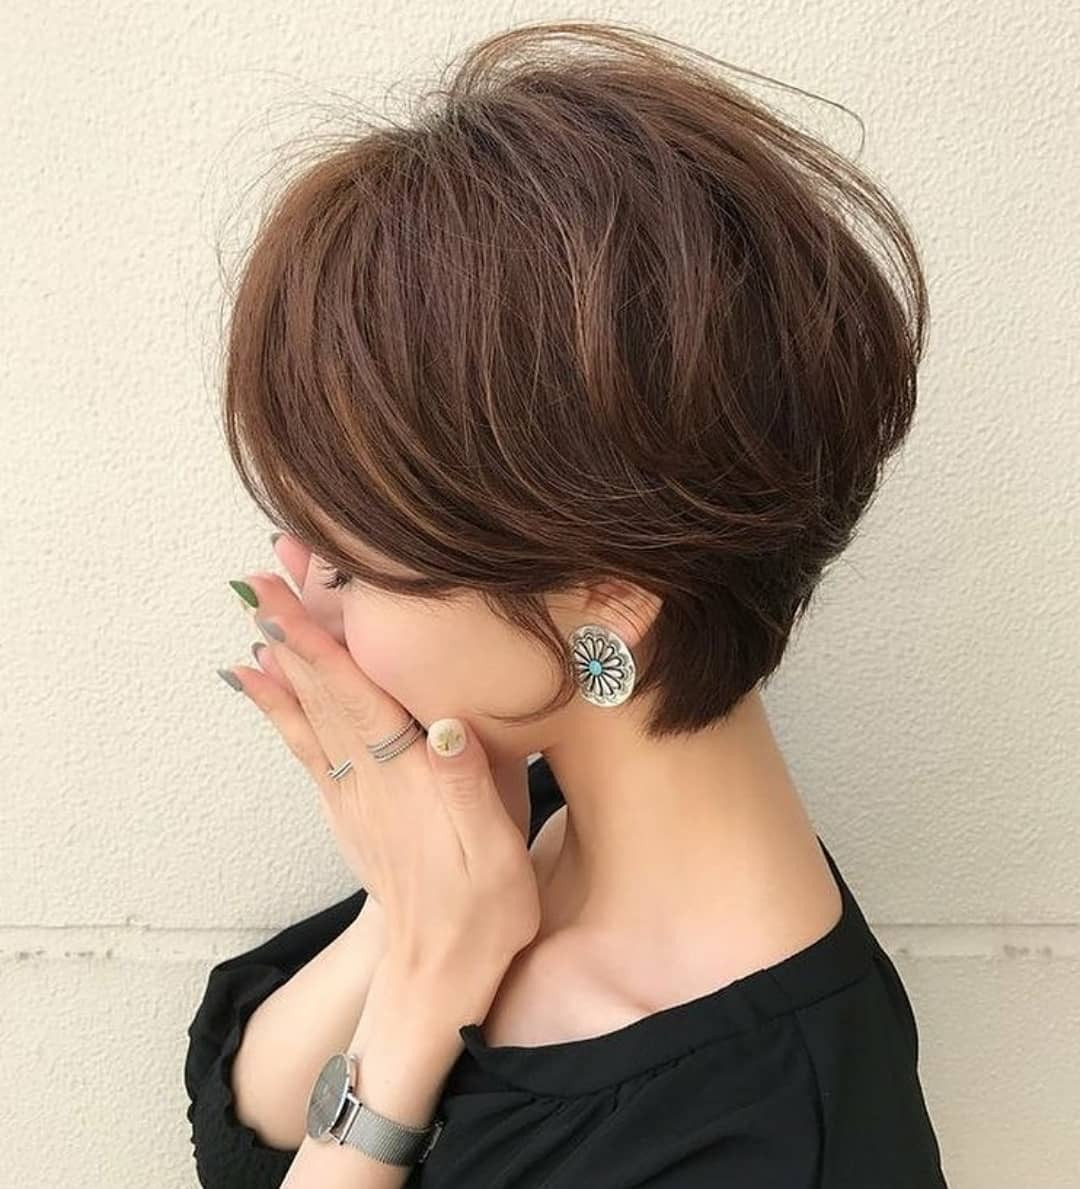 Cute Fall Hairstyles 2020
 10 Cute Short Hairstyles and Haircuts for Young Girls